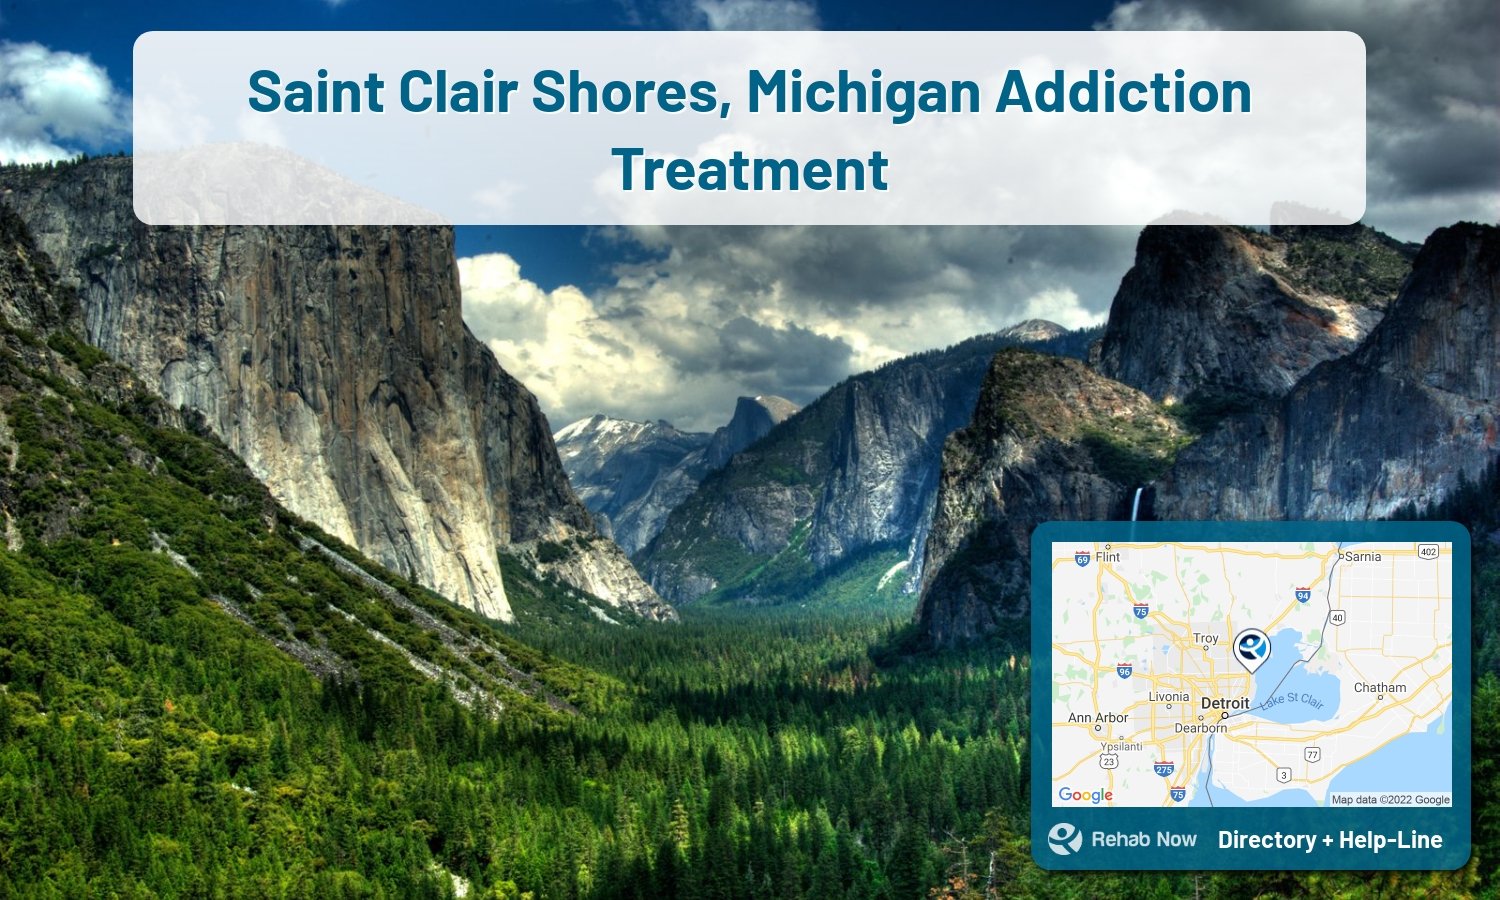 Our experts can help you find treatment now in Saint Clair Shores, Michigan. We list drug rehab and alcohol centers in Michigan.